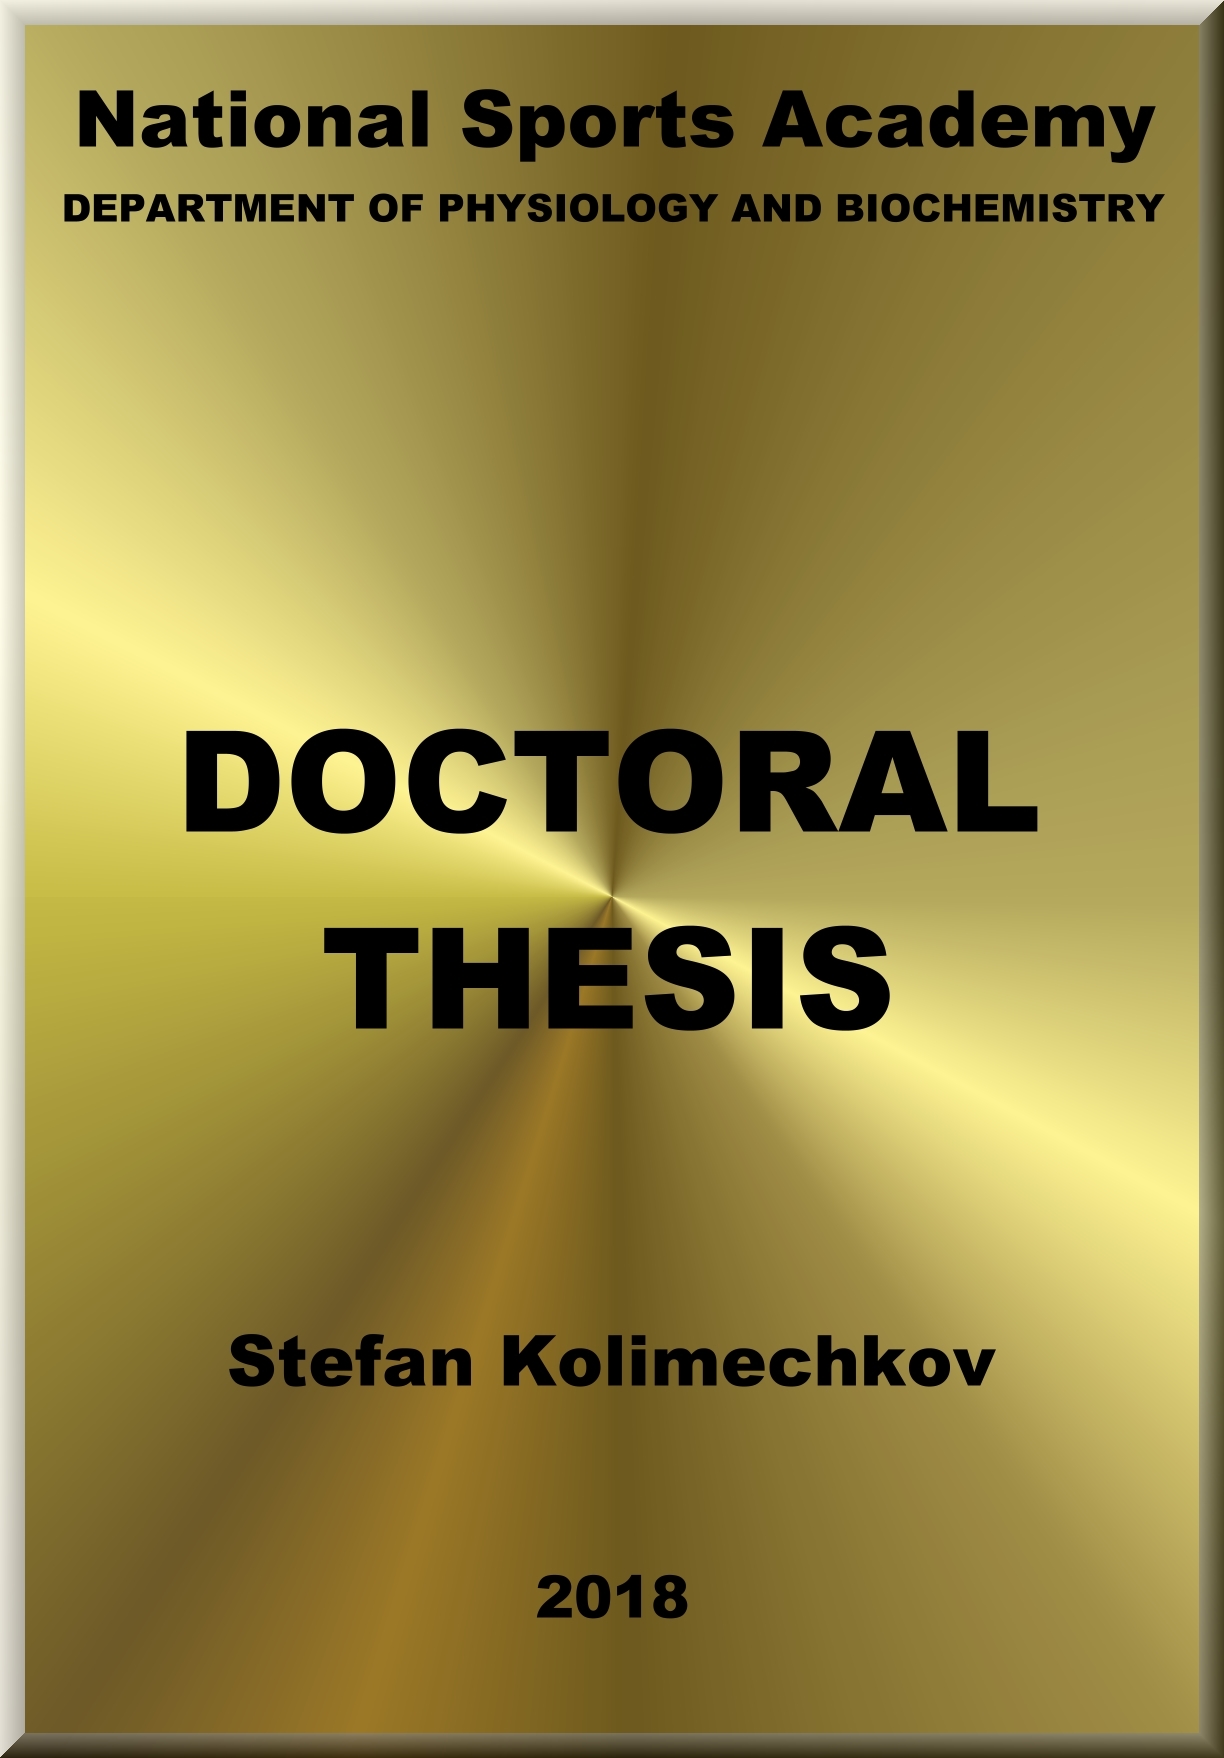 Doctoral Thesis in Physical Education (2018)